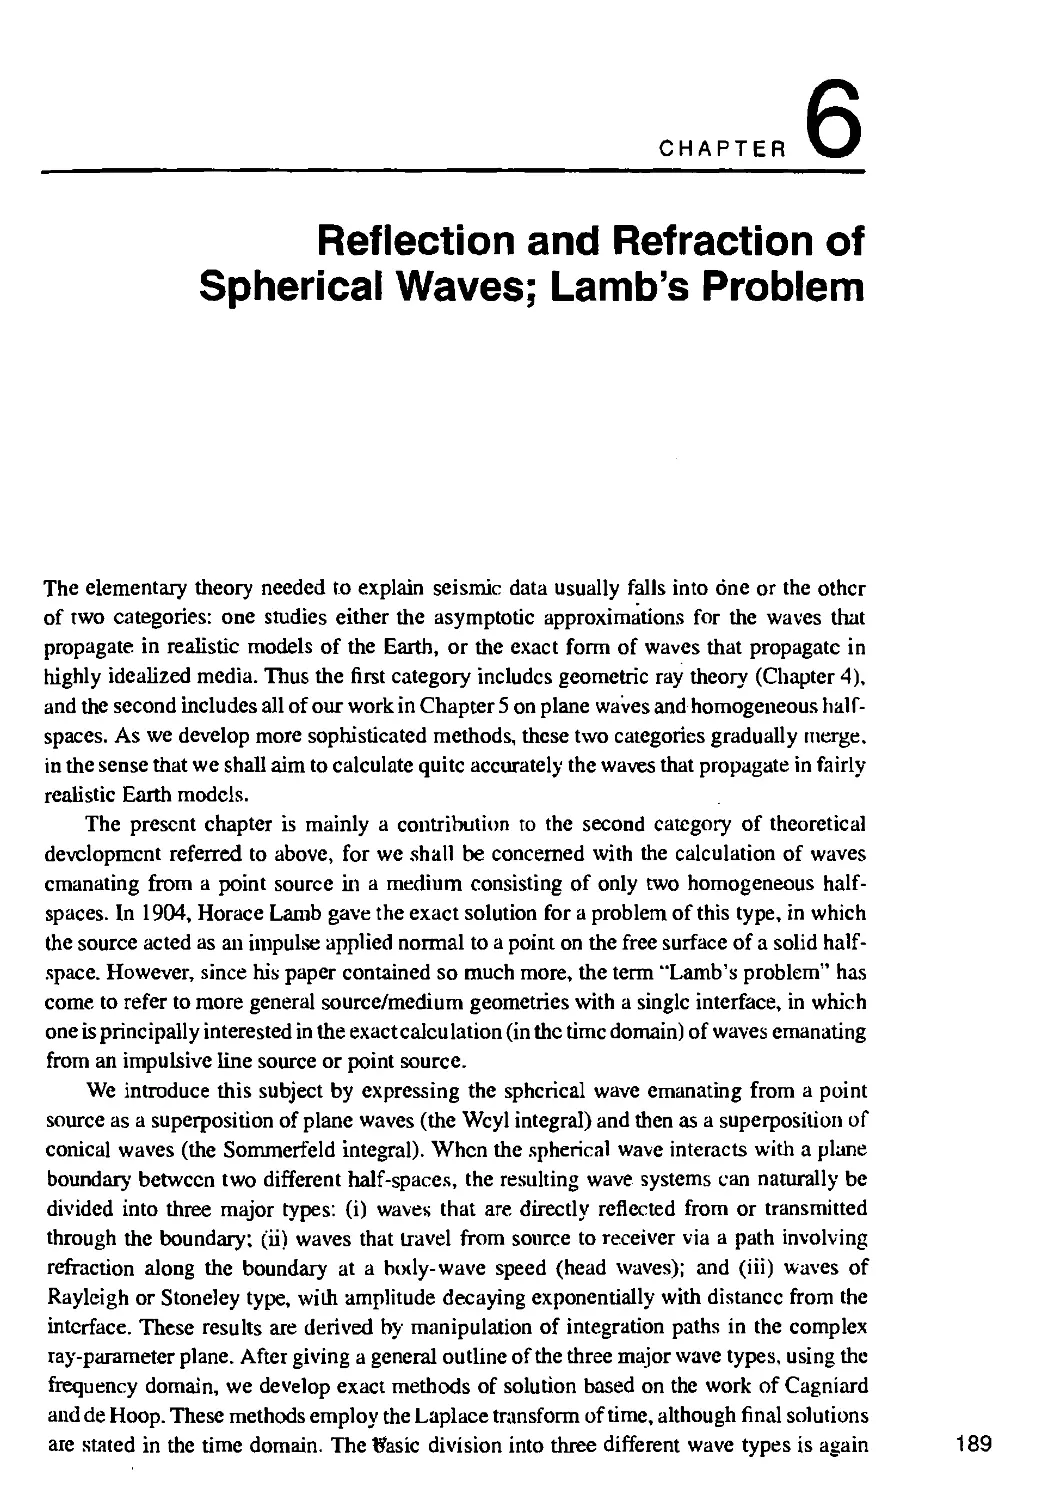 6. REFLECTION AND REFRACTION OF SPHERICAL WAVES; LAMB'S PROBLEM